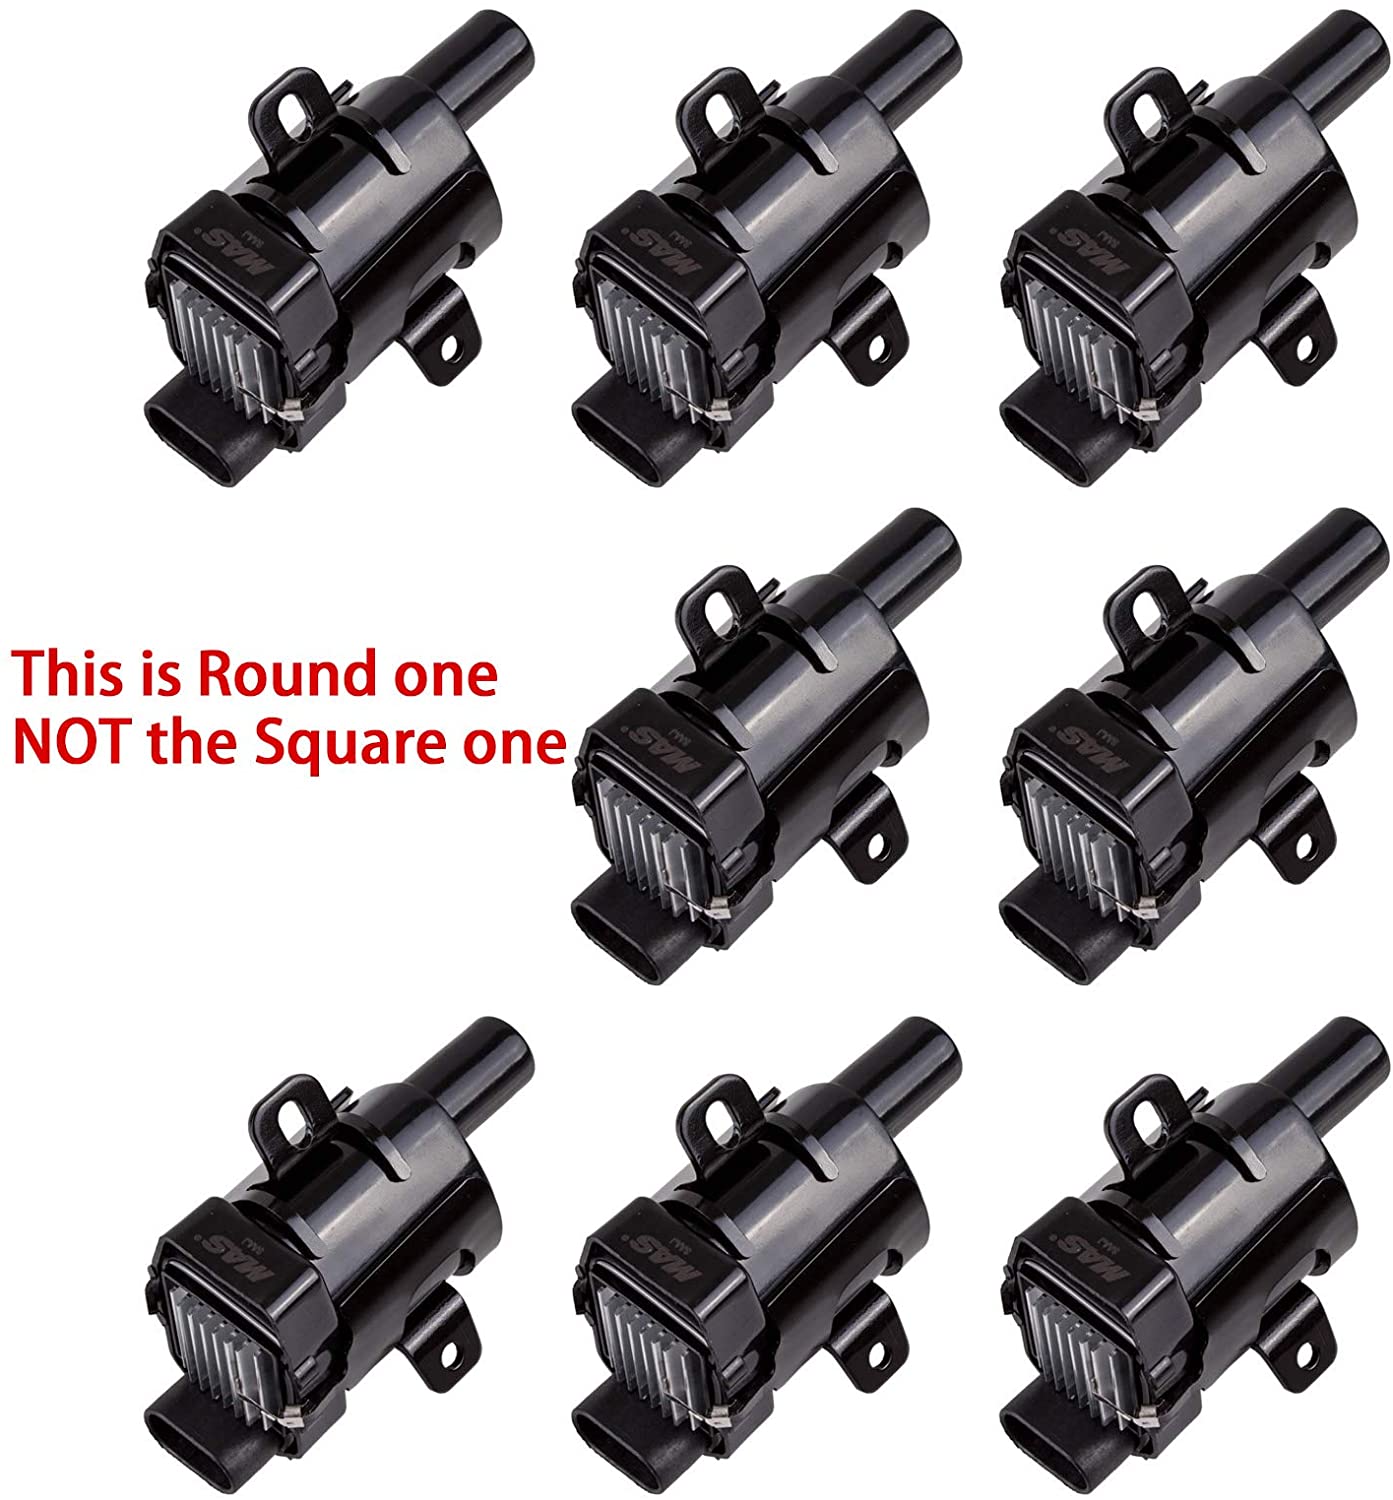 MAS ROUND Ignition Coils on Plug Pack Replacement for Chevrolet GMC V8 4.8L 5.3L 6L UF262 C1251 D-585 E254 E254P 52-1647 GN10119 IC413 10457730 19005218 8-10457-730-0 Set of 8